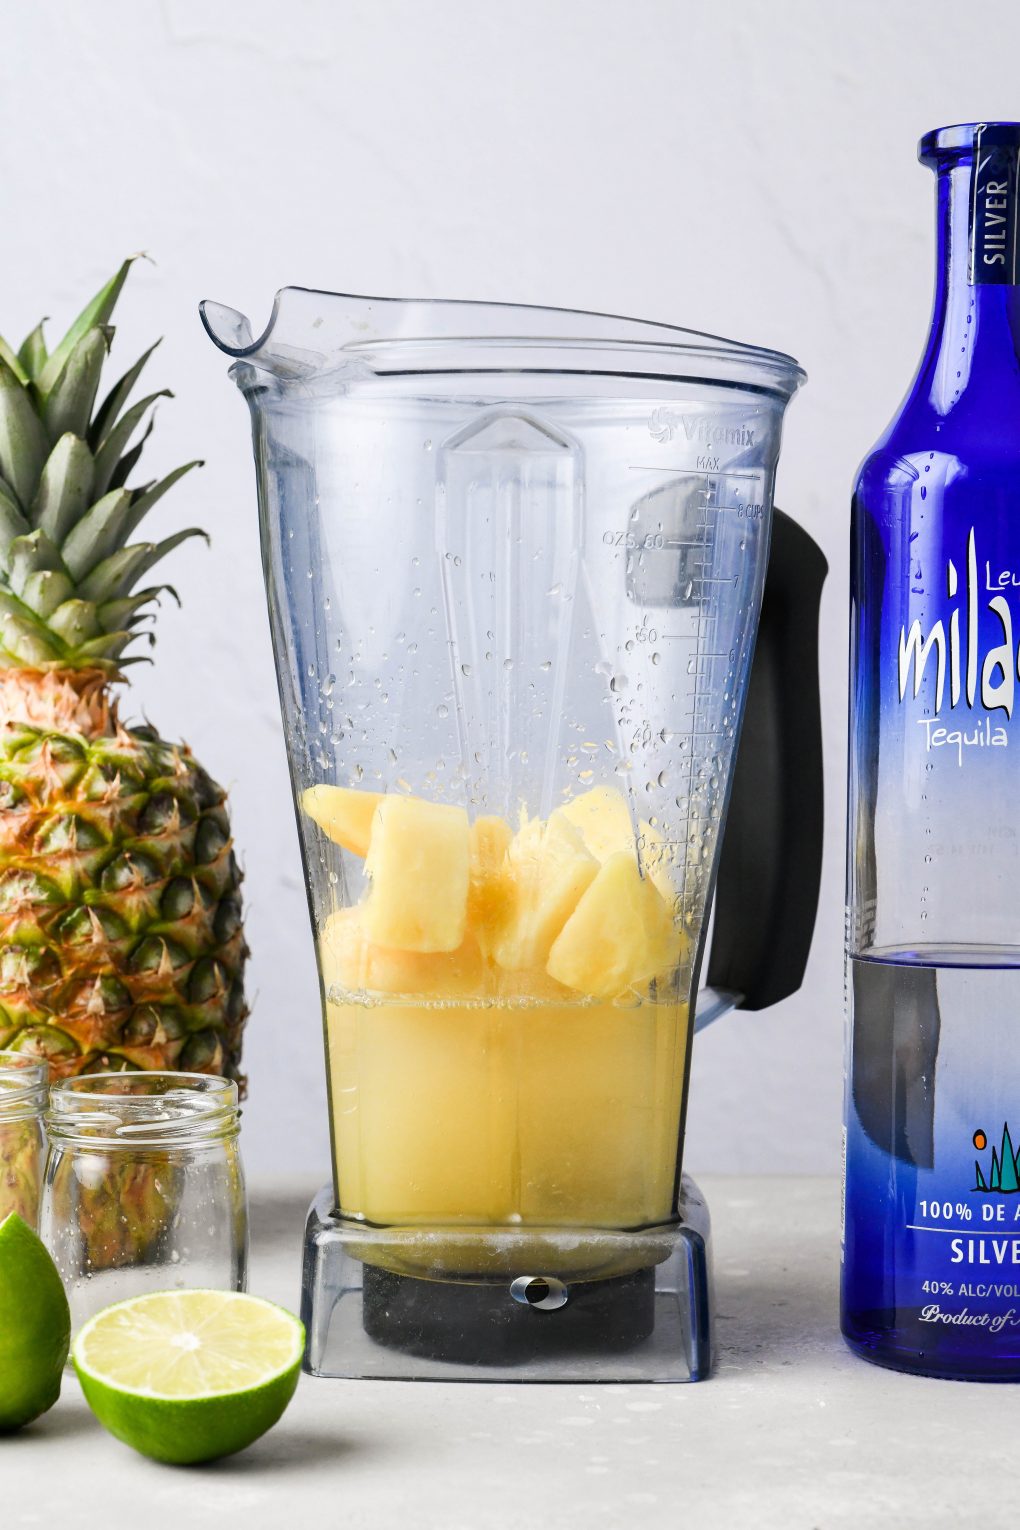 Straight on image of frozen pineapple, ice, juices, and tequila in a blender container - on a light colored background next to a fresh pineapple and a bottle of milagro silver tequila.